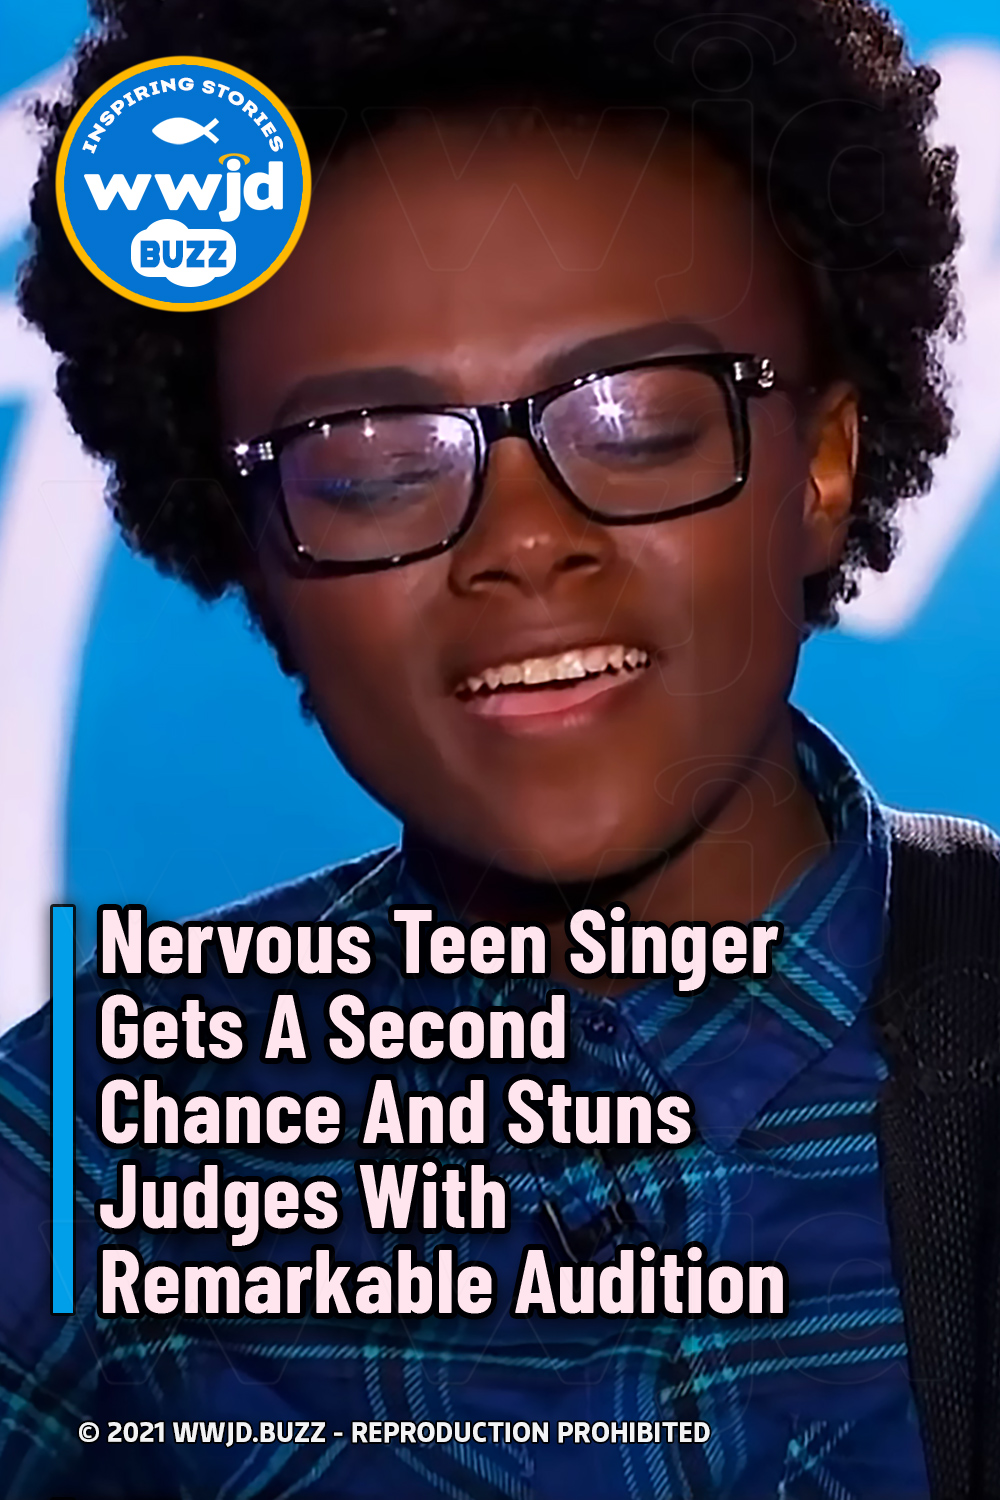 Nervous Teen Singer Gets A Second Chance And Stuns Judges With Remarkable Audition